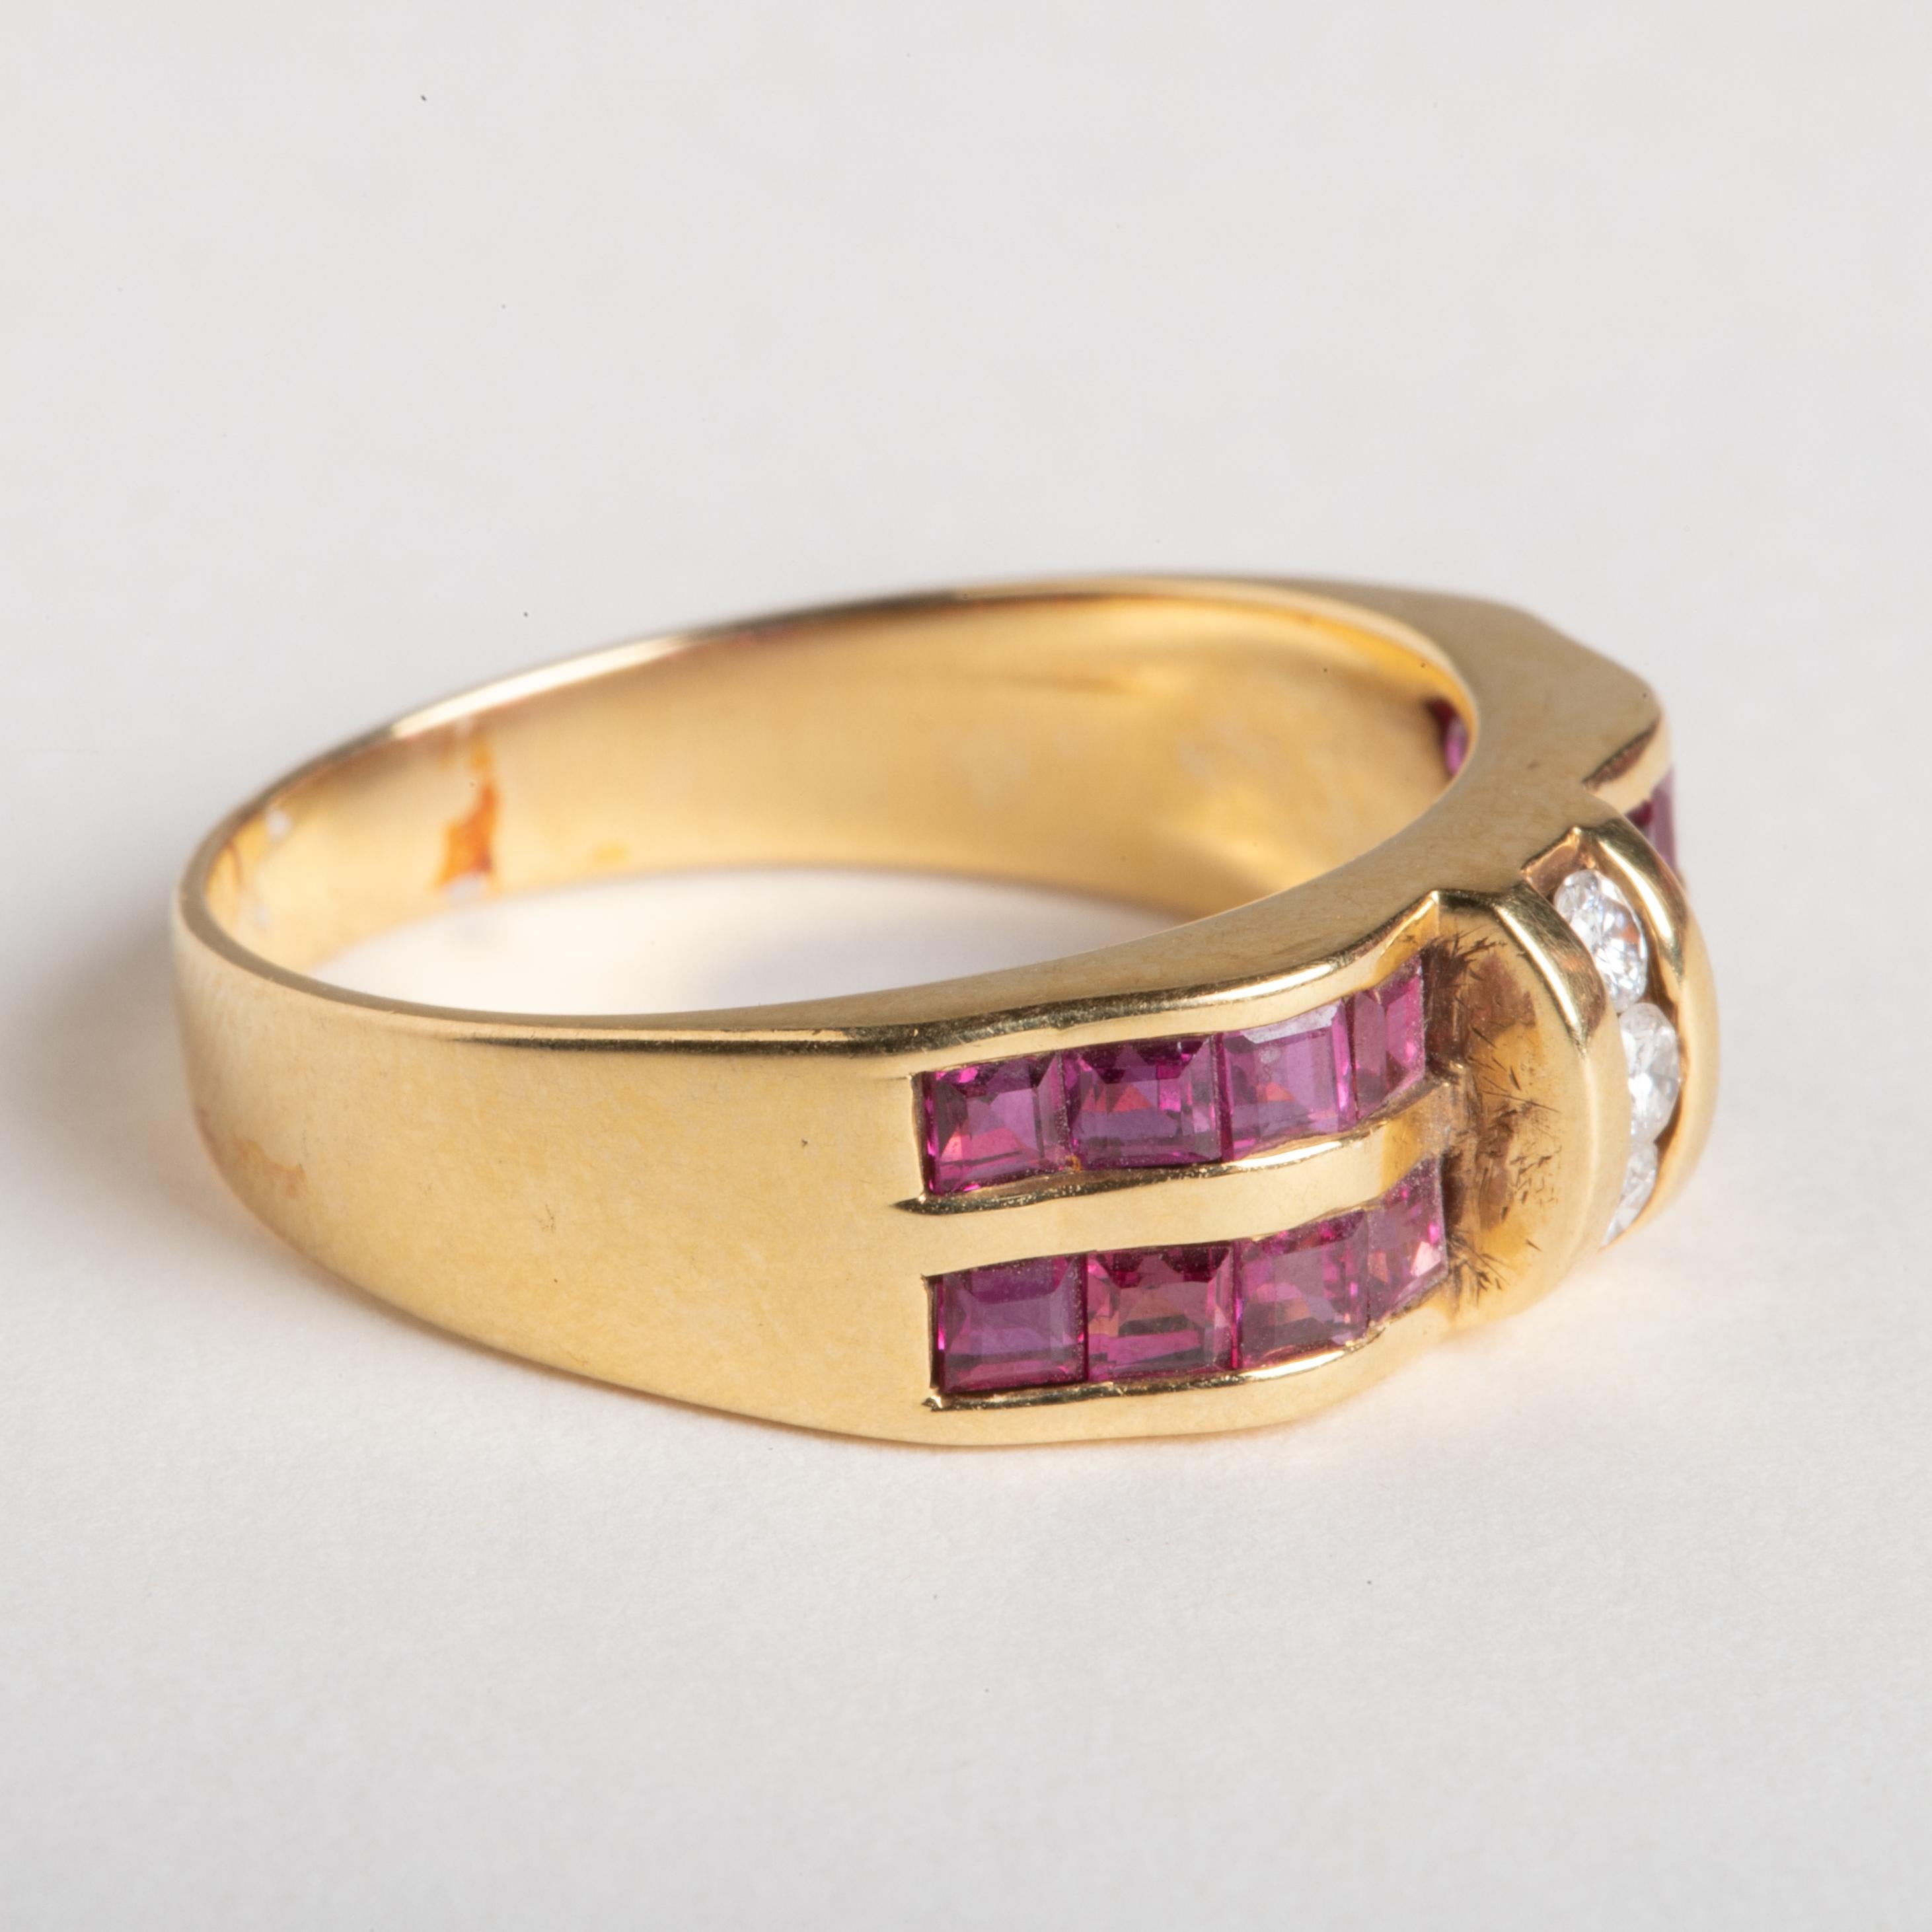 A stunning Art Deco 18k gold ring with two rows of square-cut, channel set rubies, and 3 round brilliant cut diamonds in the center.  The setting has a curved, dimensional shape that the rubies wrap within.  It's more like a band and could make an